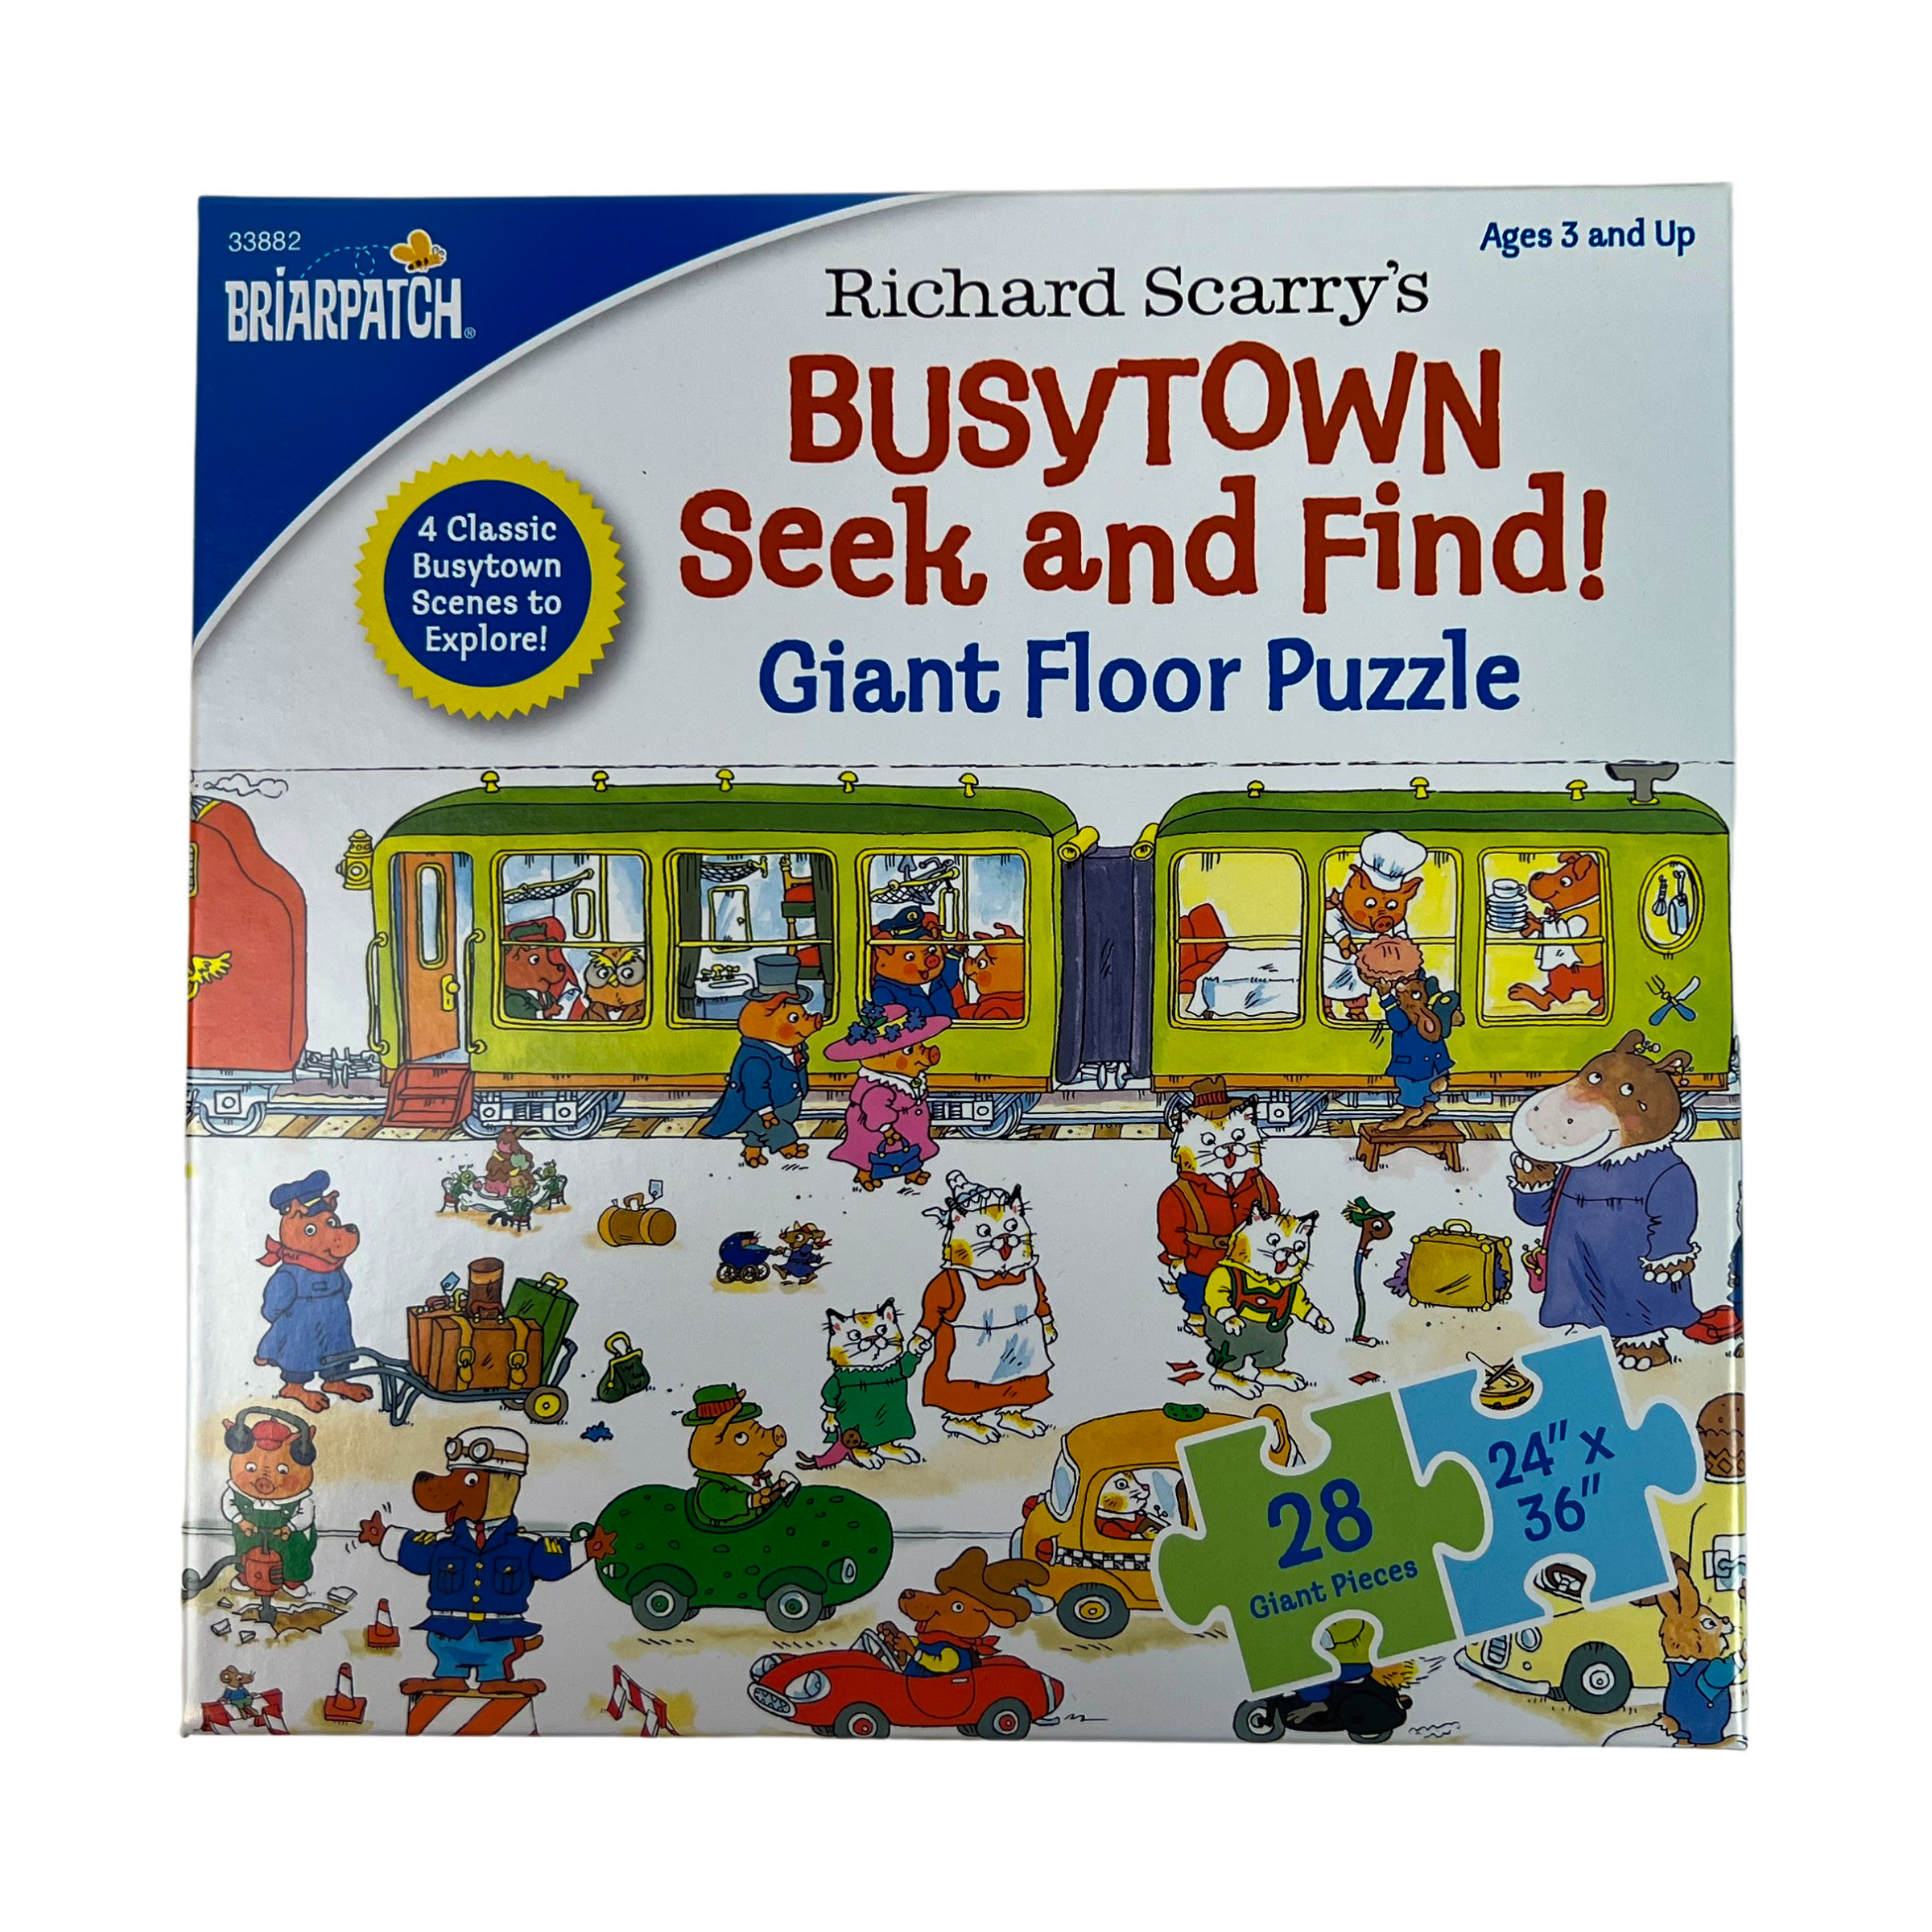 Briarpatch Richard Scarry's Busytown Seek and Find! Giant Floor Puzzle: 28 Pcs